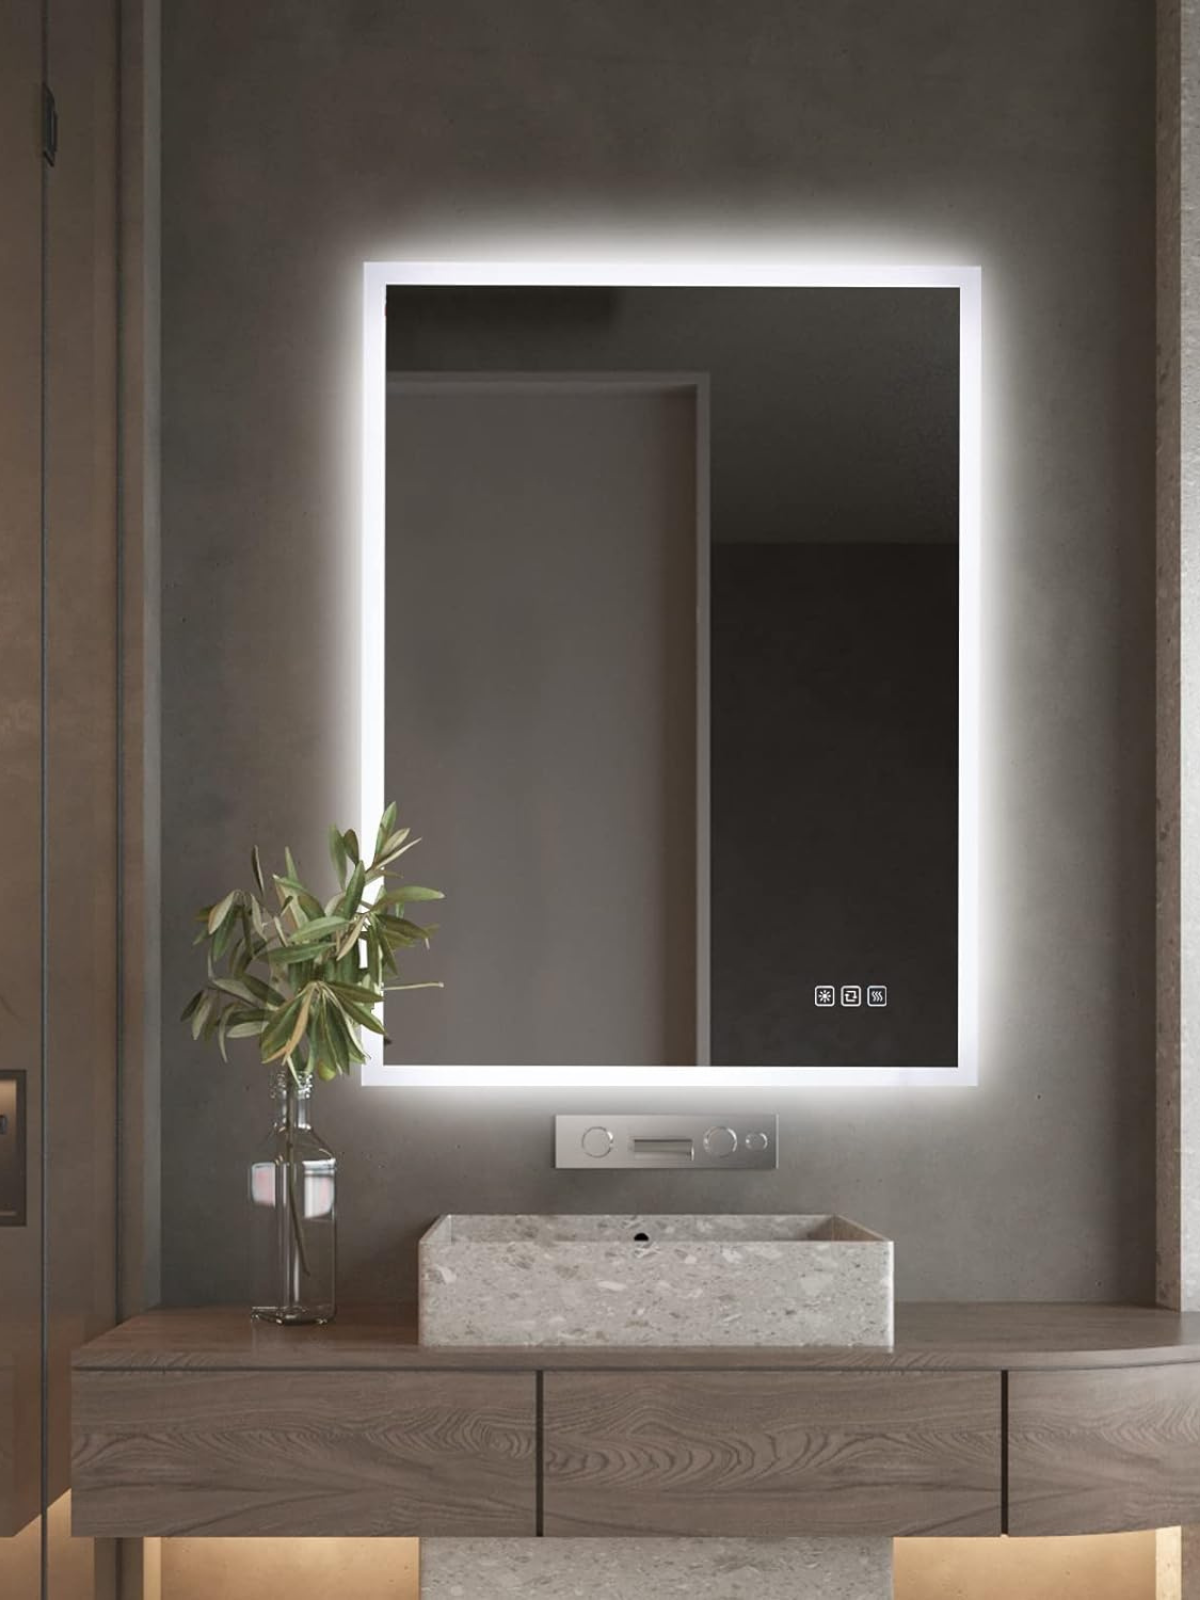 LED Bathroom Vanity Mirror with Backlit 36x28 Inch, Wall Mounted Mirror with LED Lights, Adjustable Light, Anti Fog, Memory Dimming Function, Vertical & Horizontal